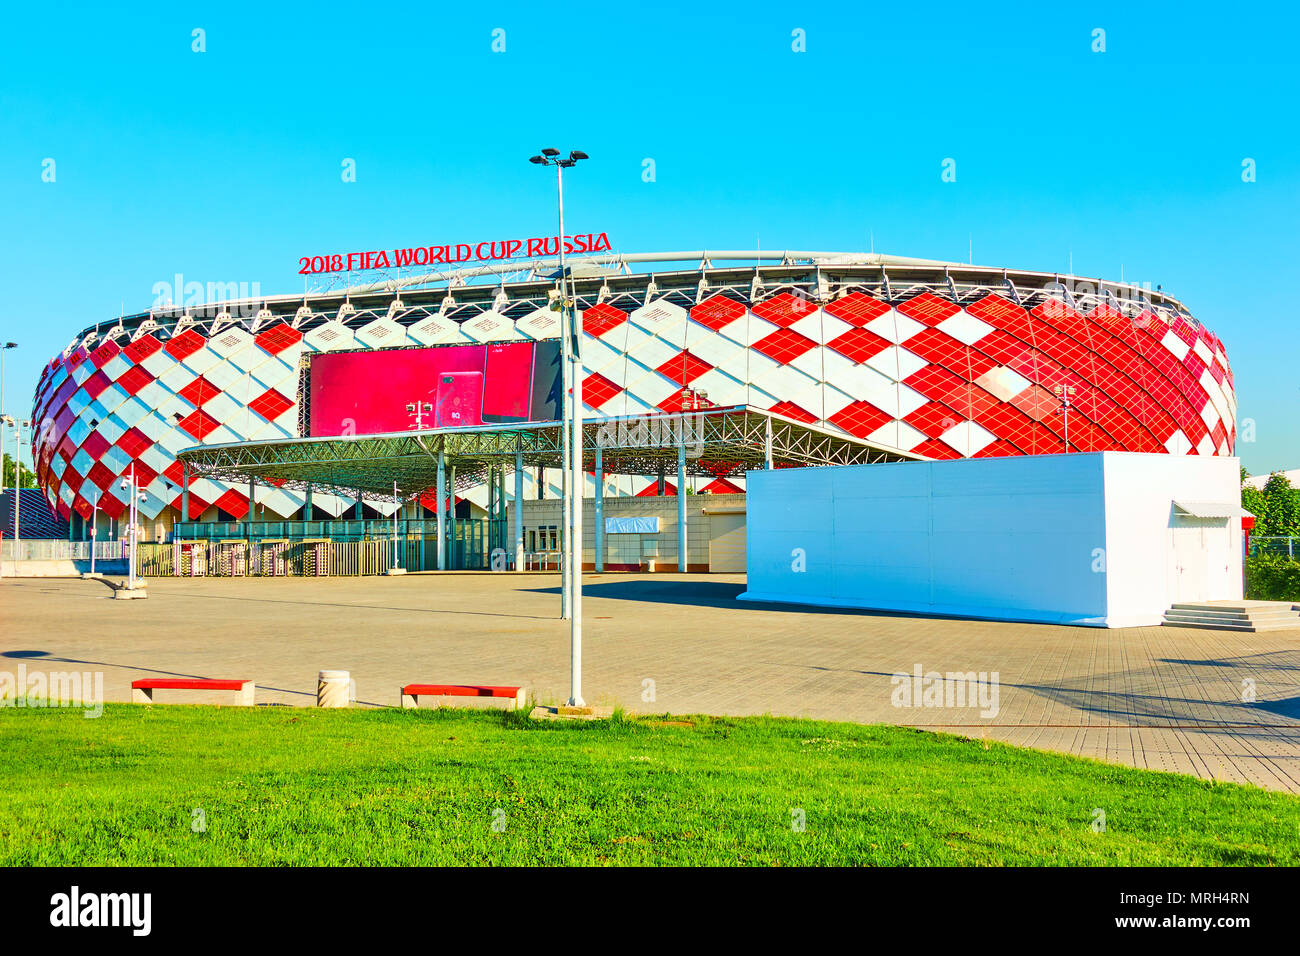 Moscow, Russia - May 26, 2018: Otkrytie Arena Stadium (Spartak Stadium) in Moscow ready for 2018 FIFA World Cup Russia Stock Photo